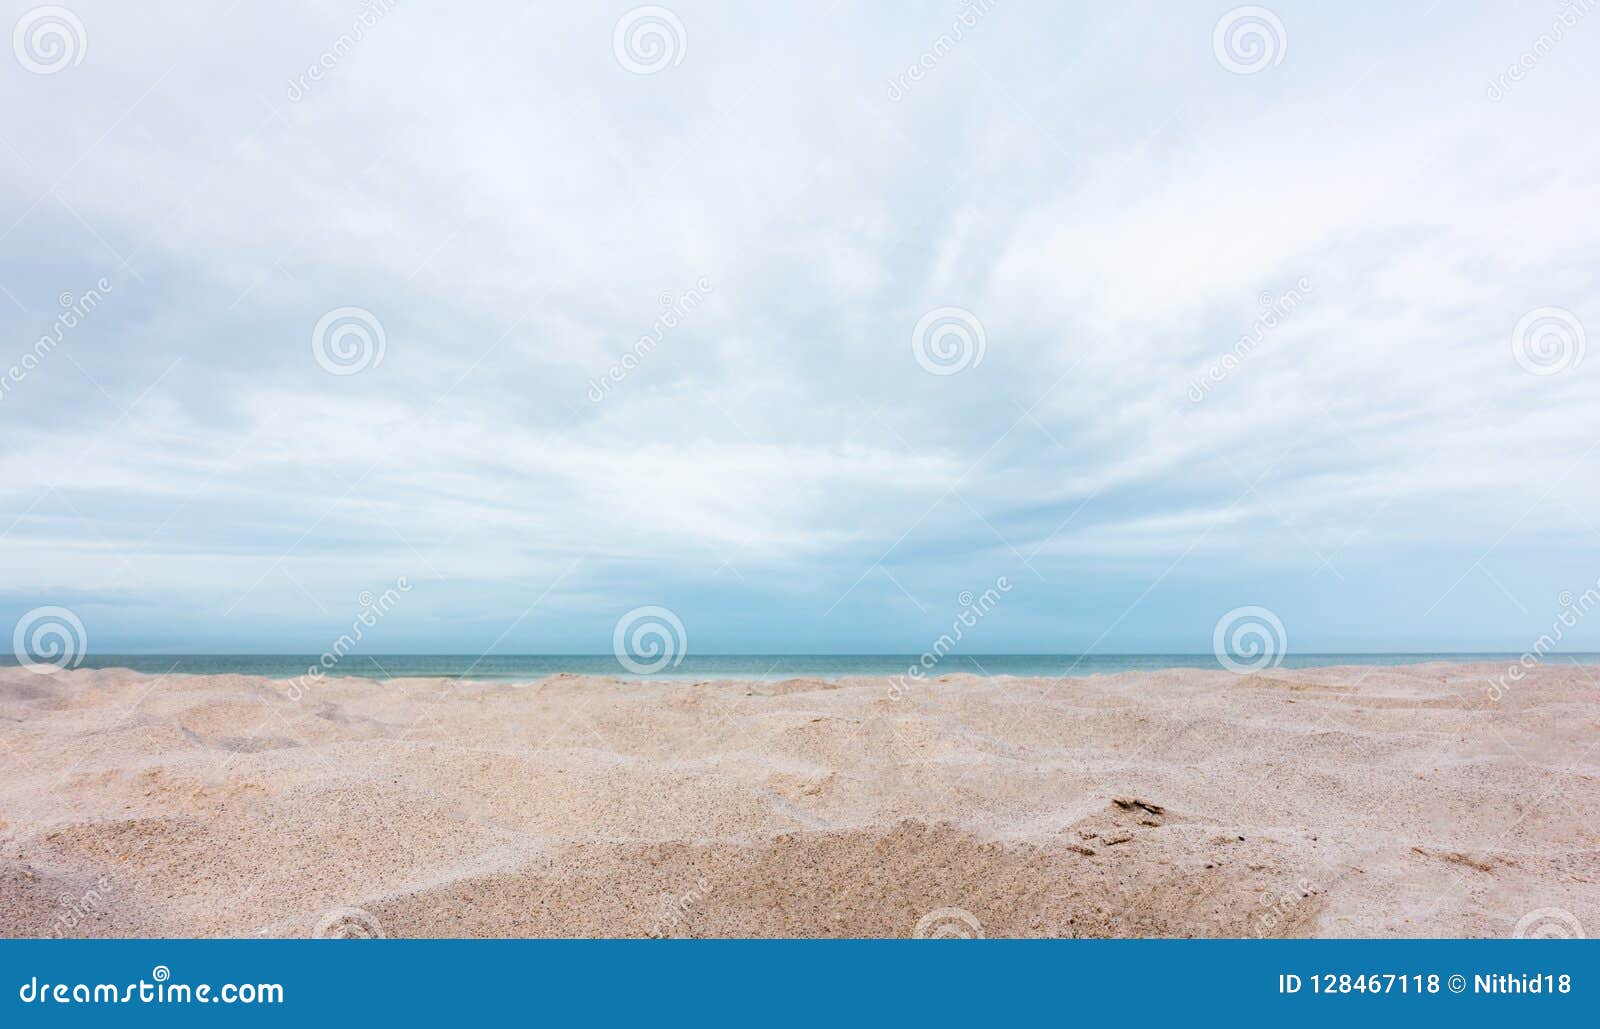 view of beautiful beach sand and sky background